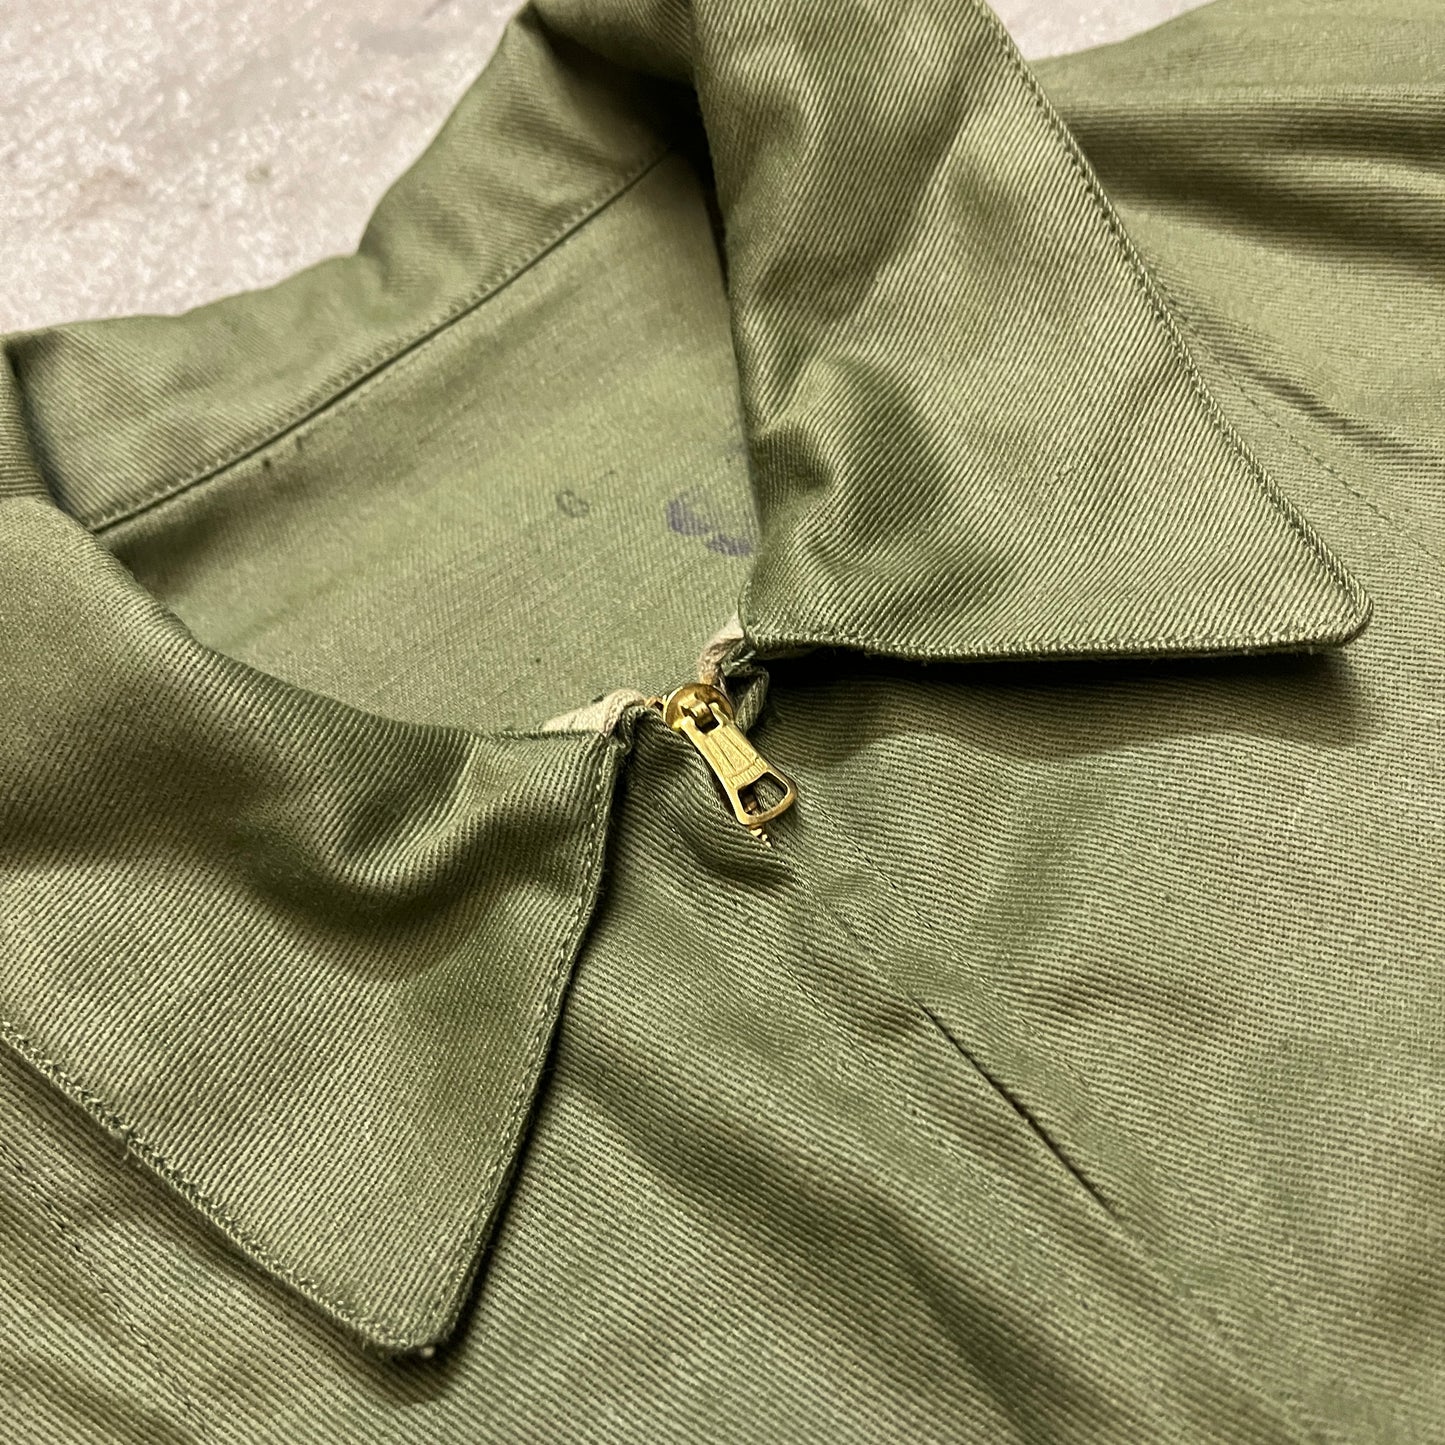 1960s Army Cyclist Jacket With 1940s Lightning Zipper